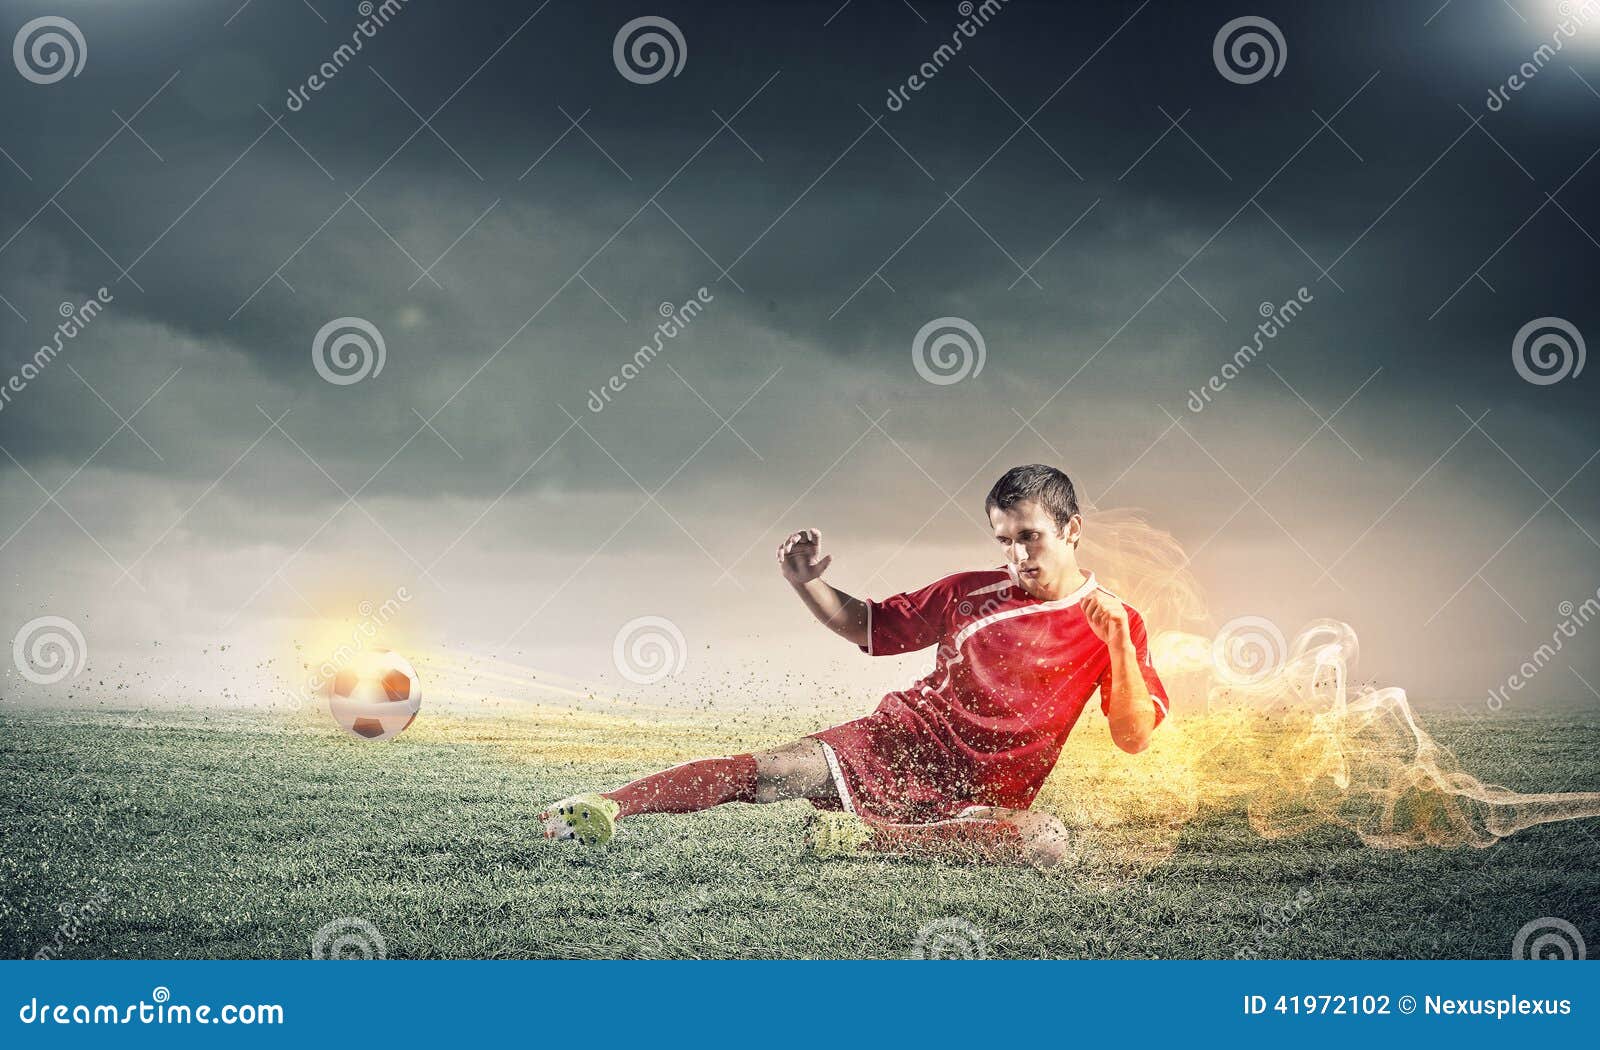 Football player stock photo. Image of night, field, compete - 41972102